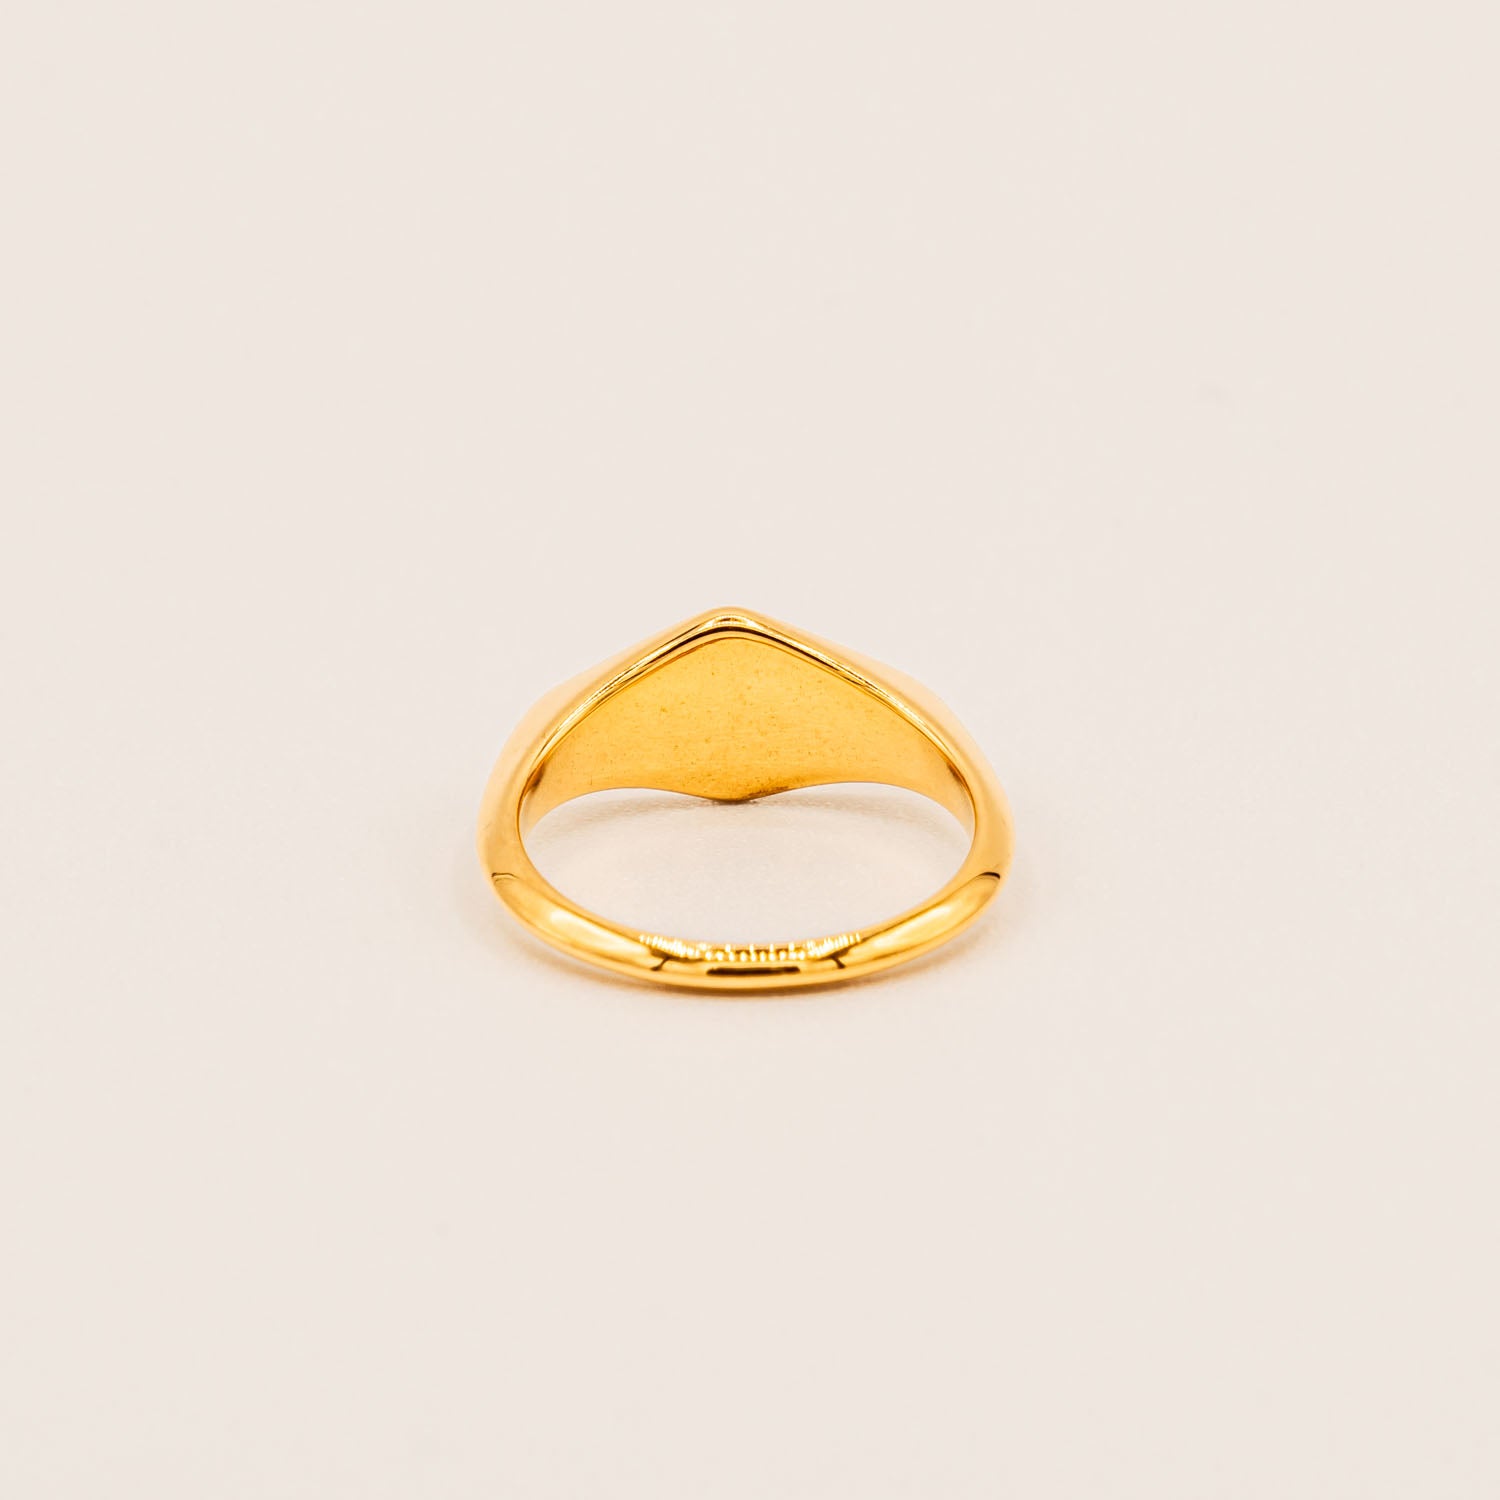 Oliver Ring-Rings-Jessica Wang